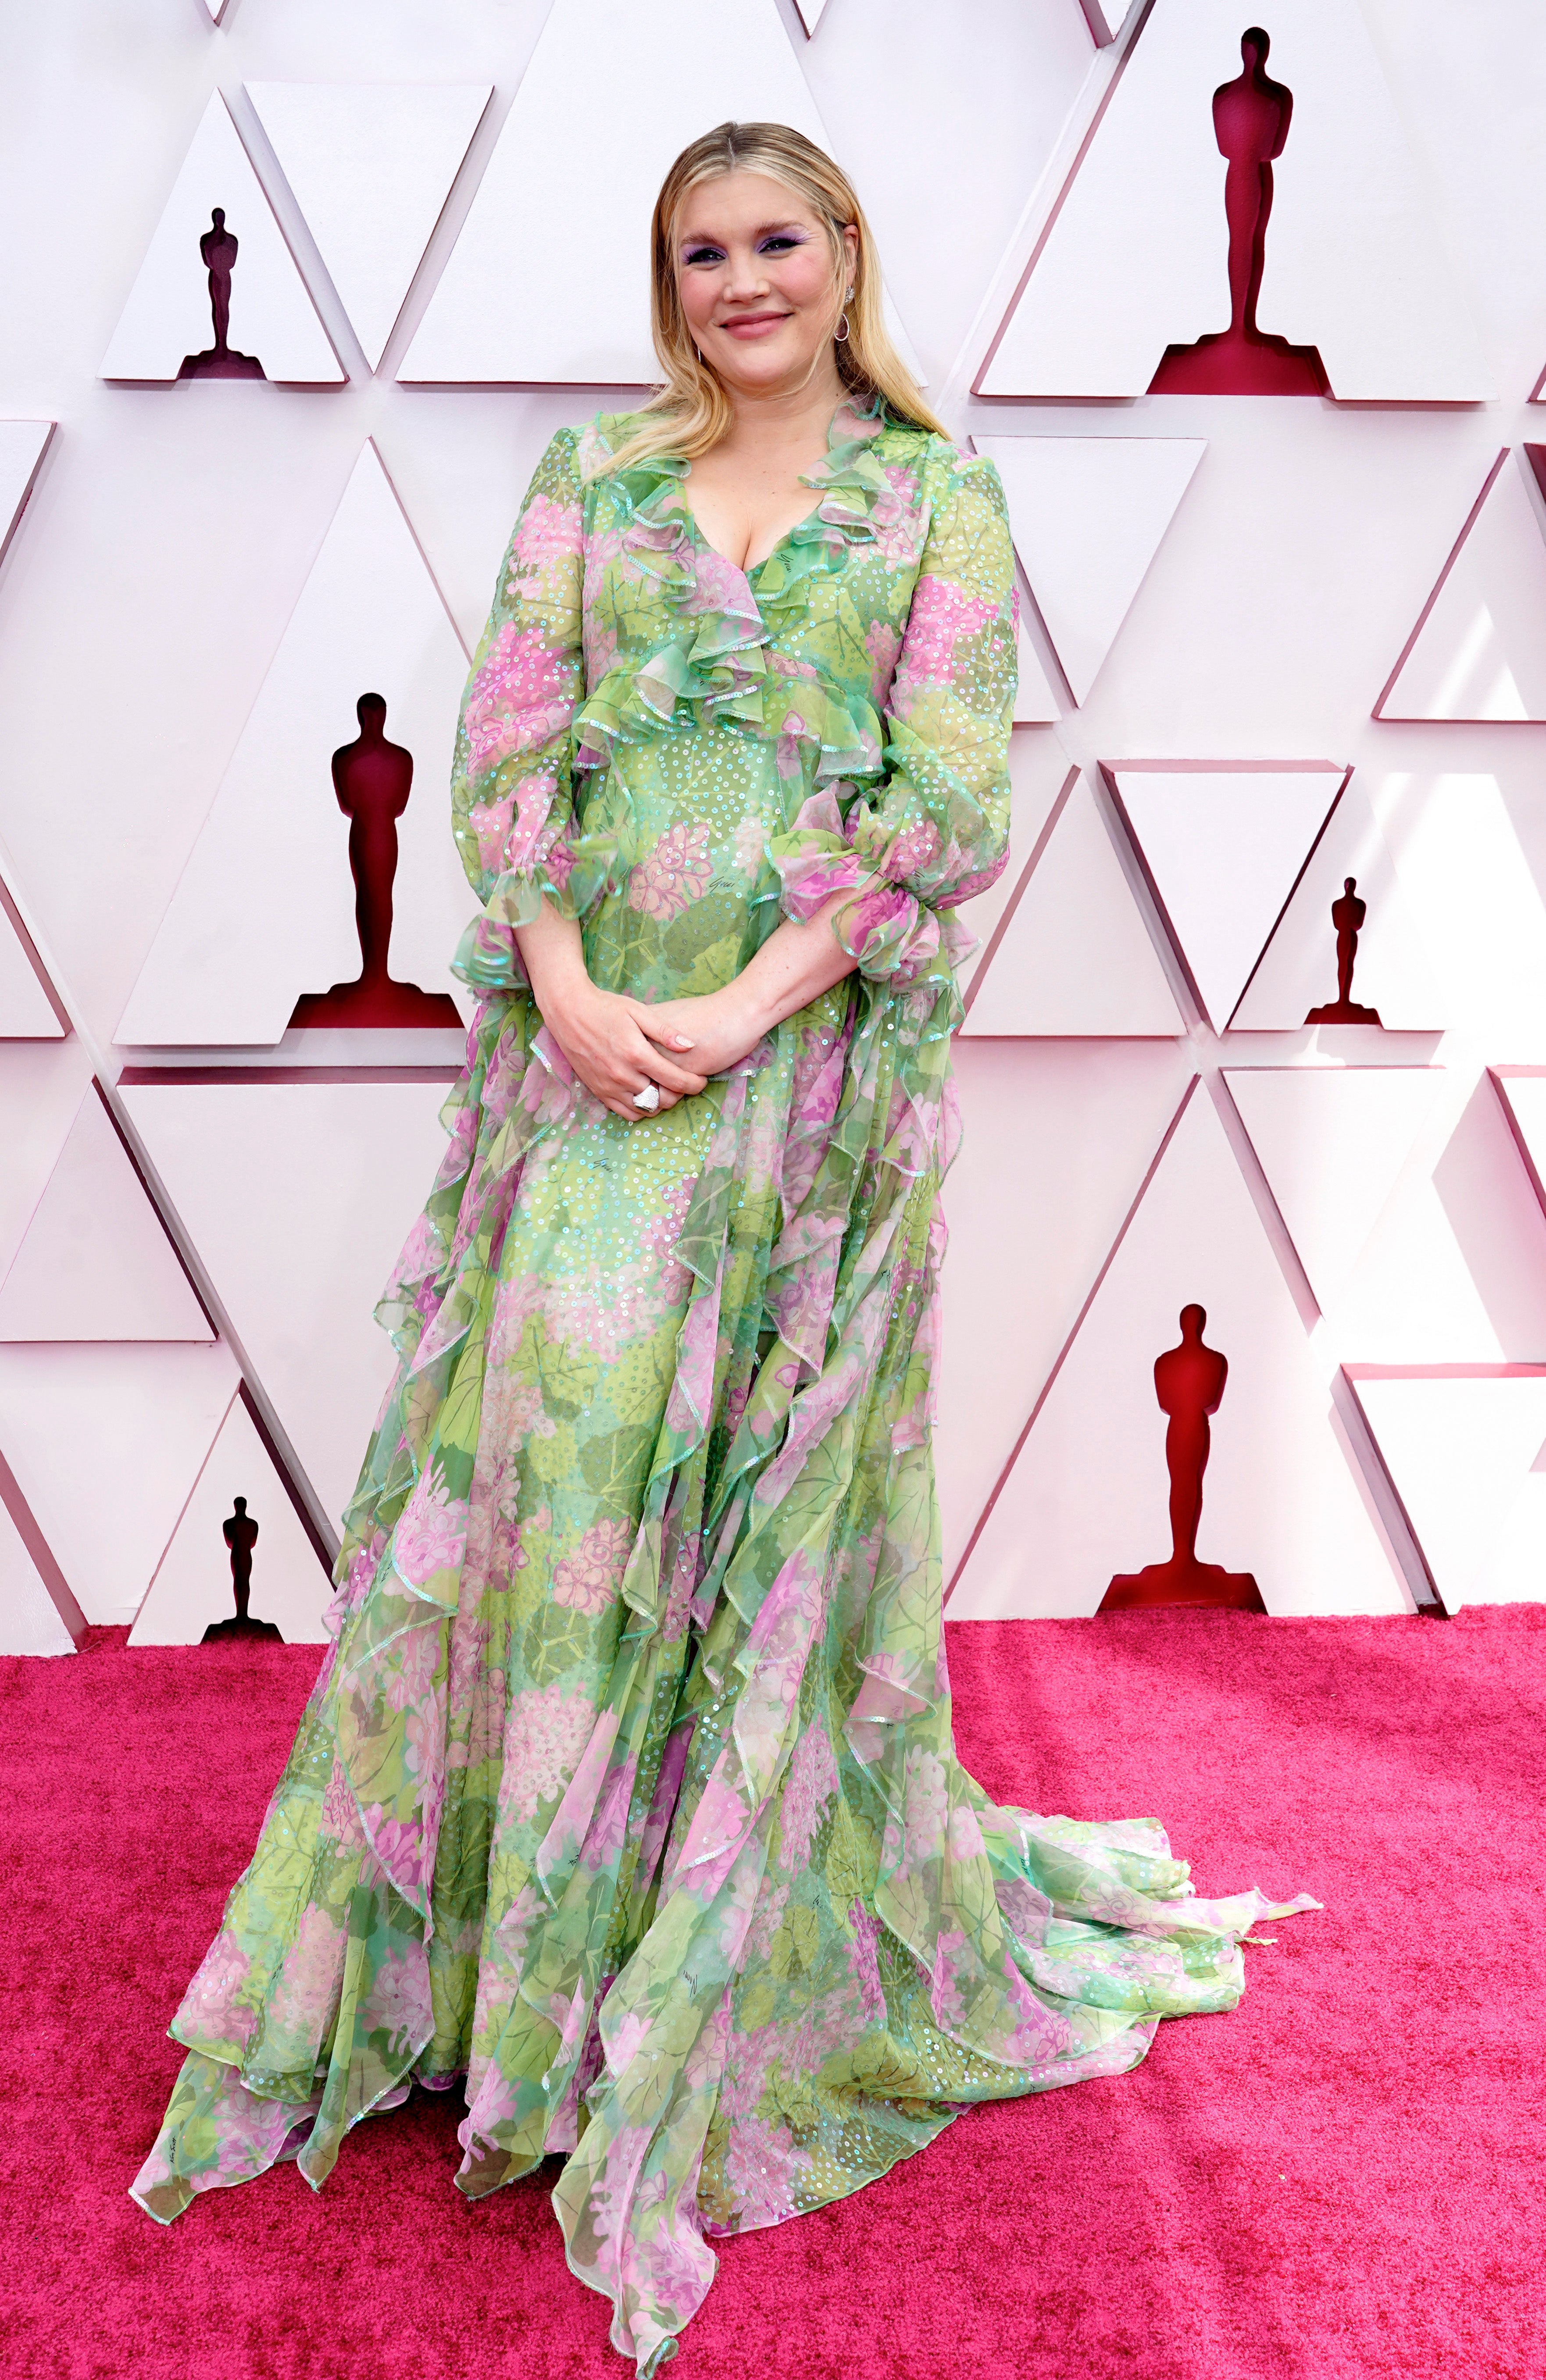 Emerald Fennell on the Oscars red carpet wearing Gucci